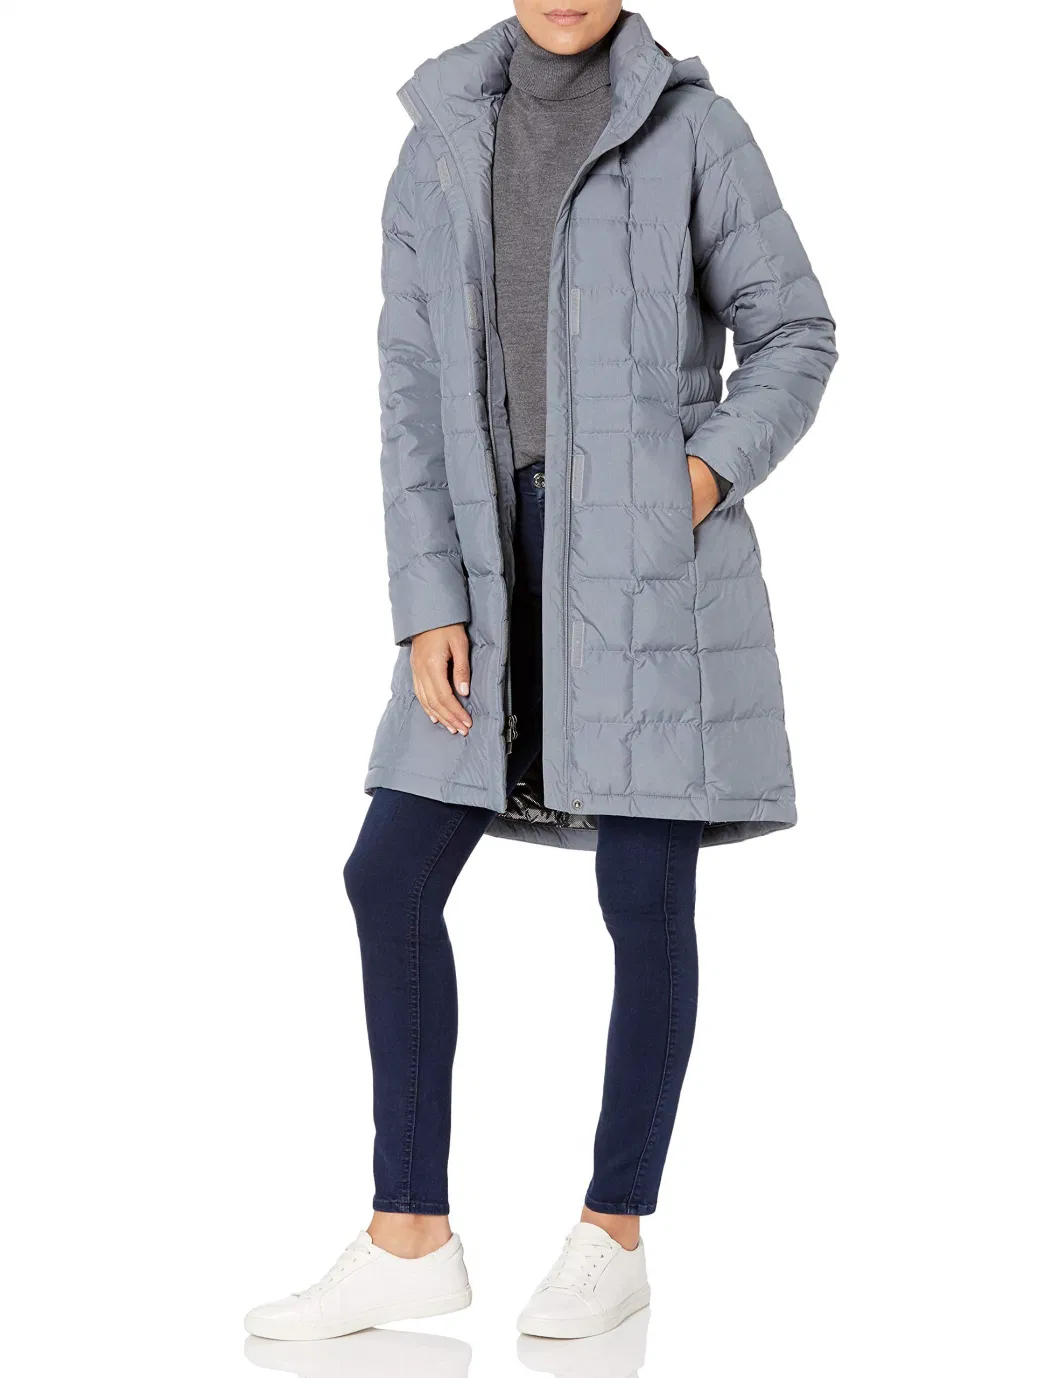 Asiapo China Factory Women&prime;s DWR Insulated Lightweight Long Down Parka Jacket with Removable Hood